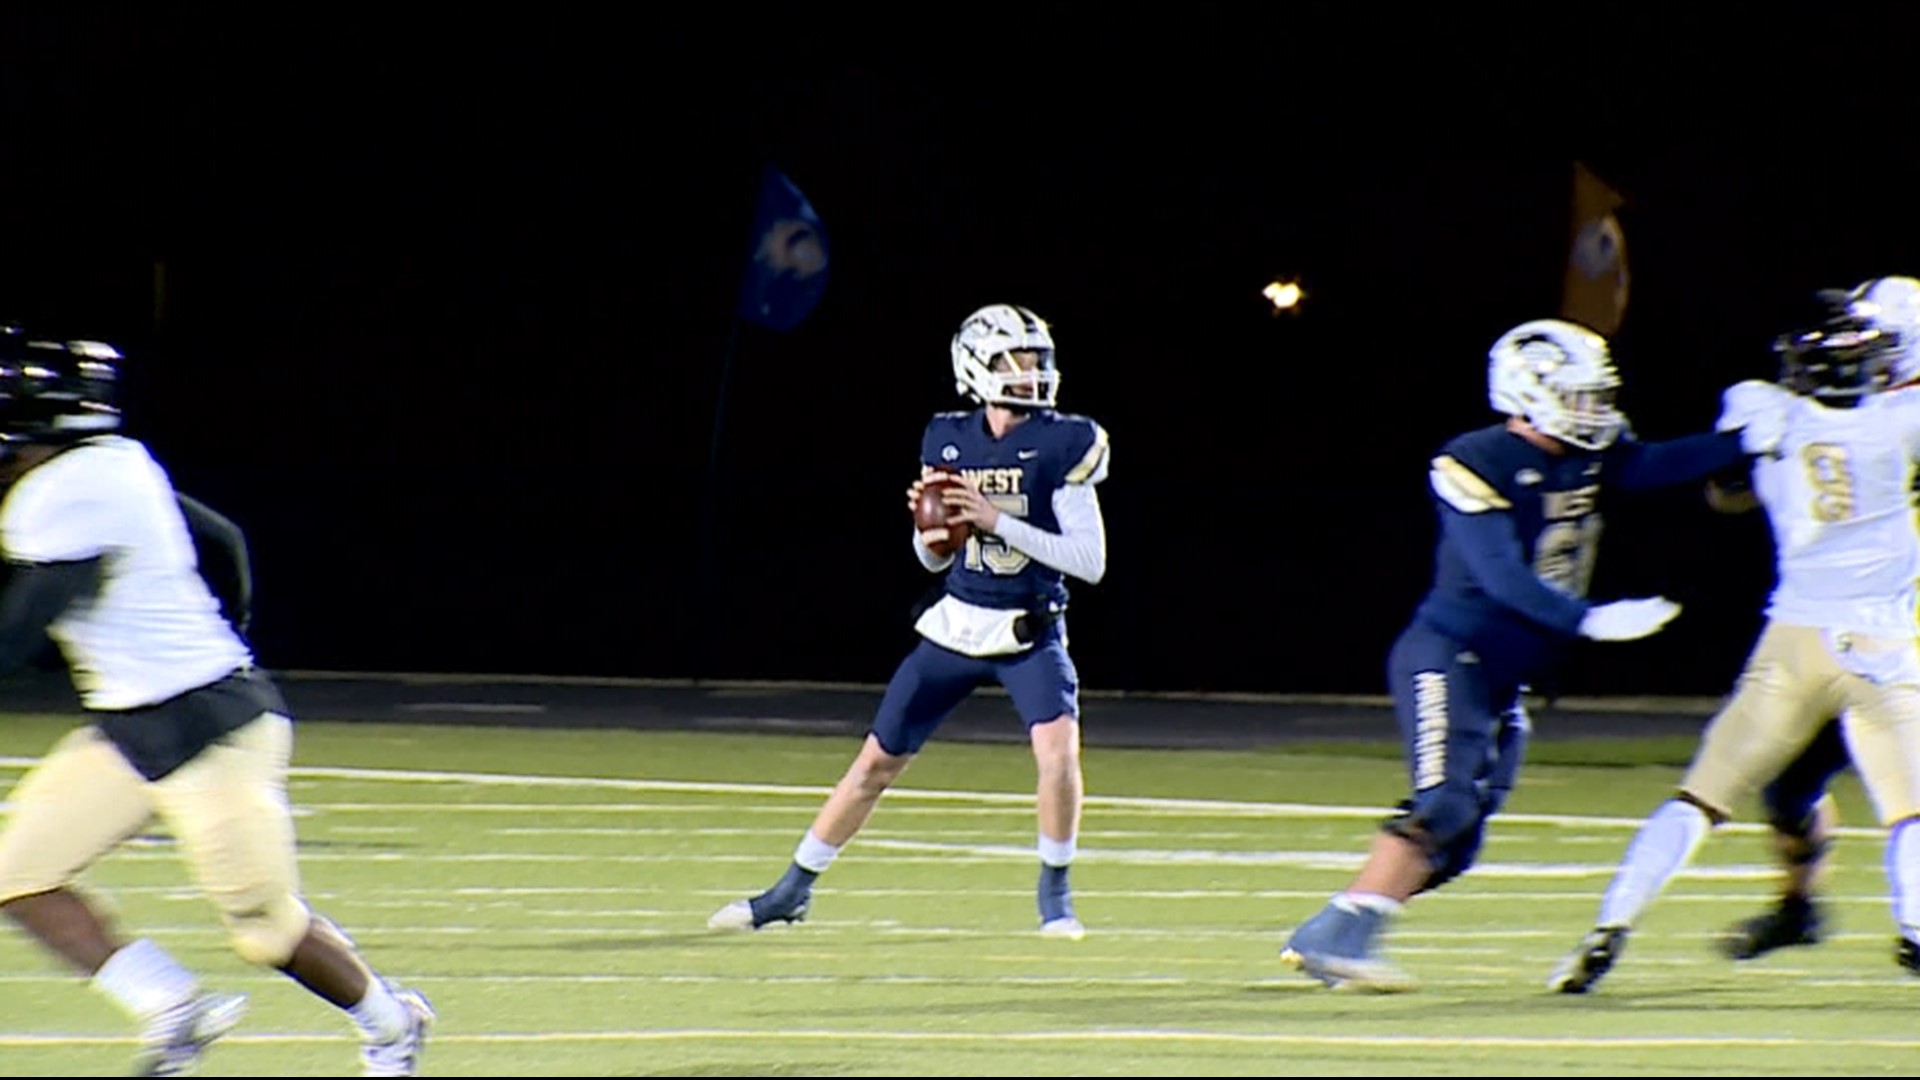 Casey threw for four touchdowns as Bentonville West picked up its first playoff win since 2019 in a 42-20 victory over Jonesboro.